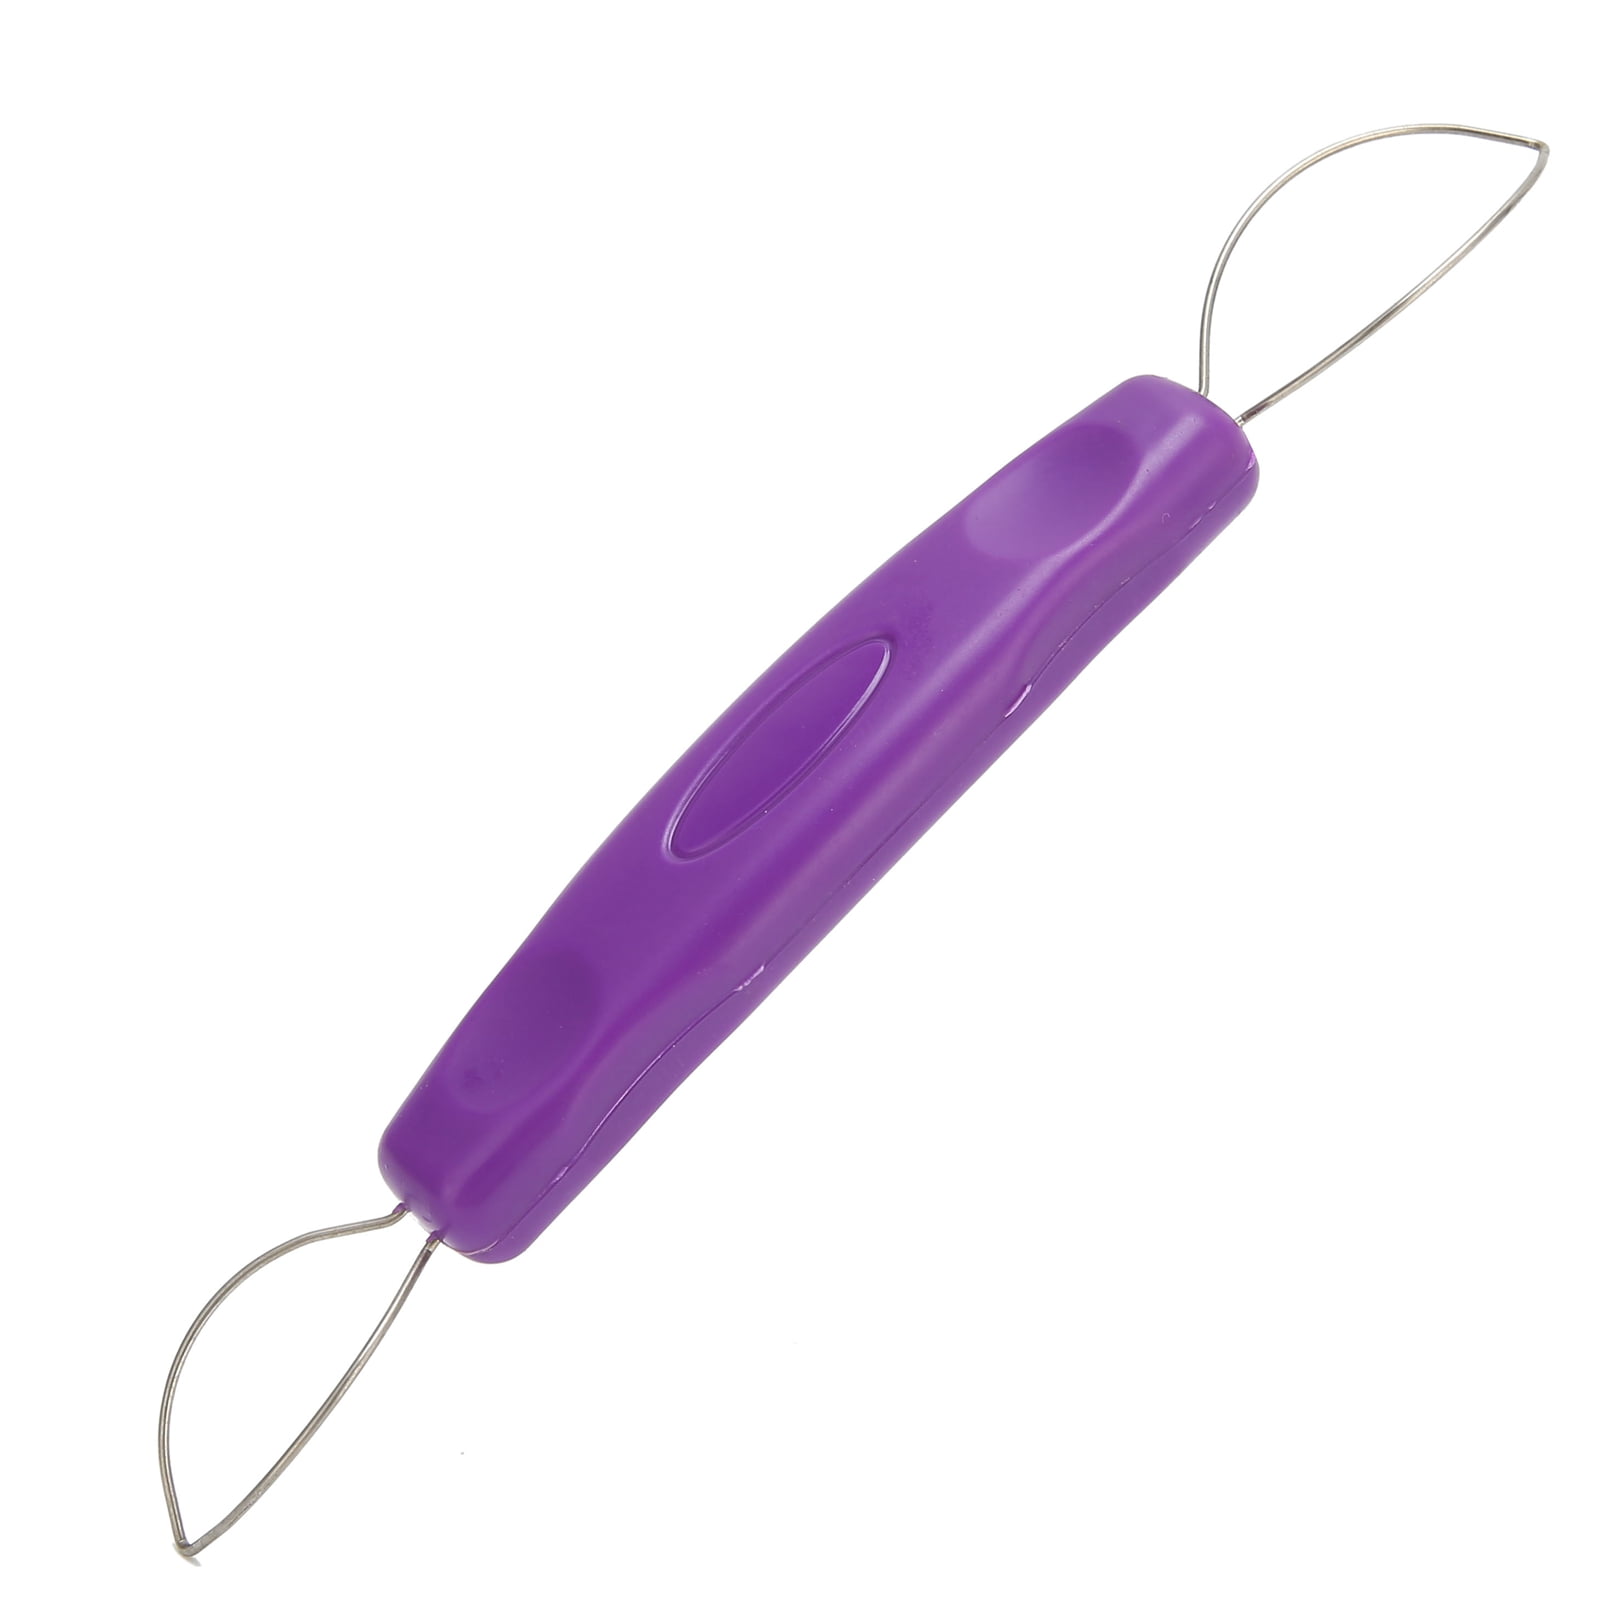 This delicate grape peeler that is frankly a little bit arousing.